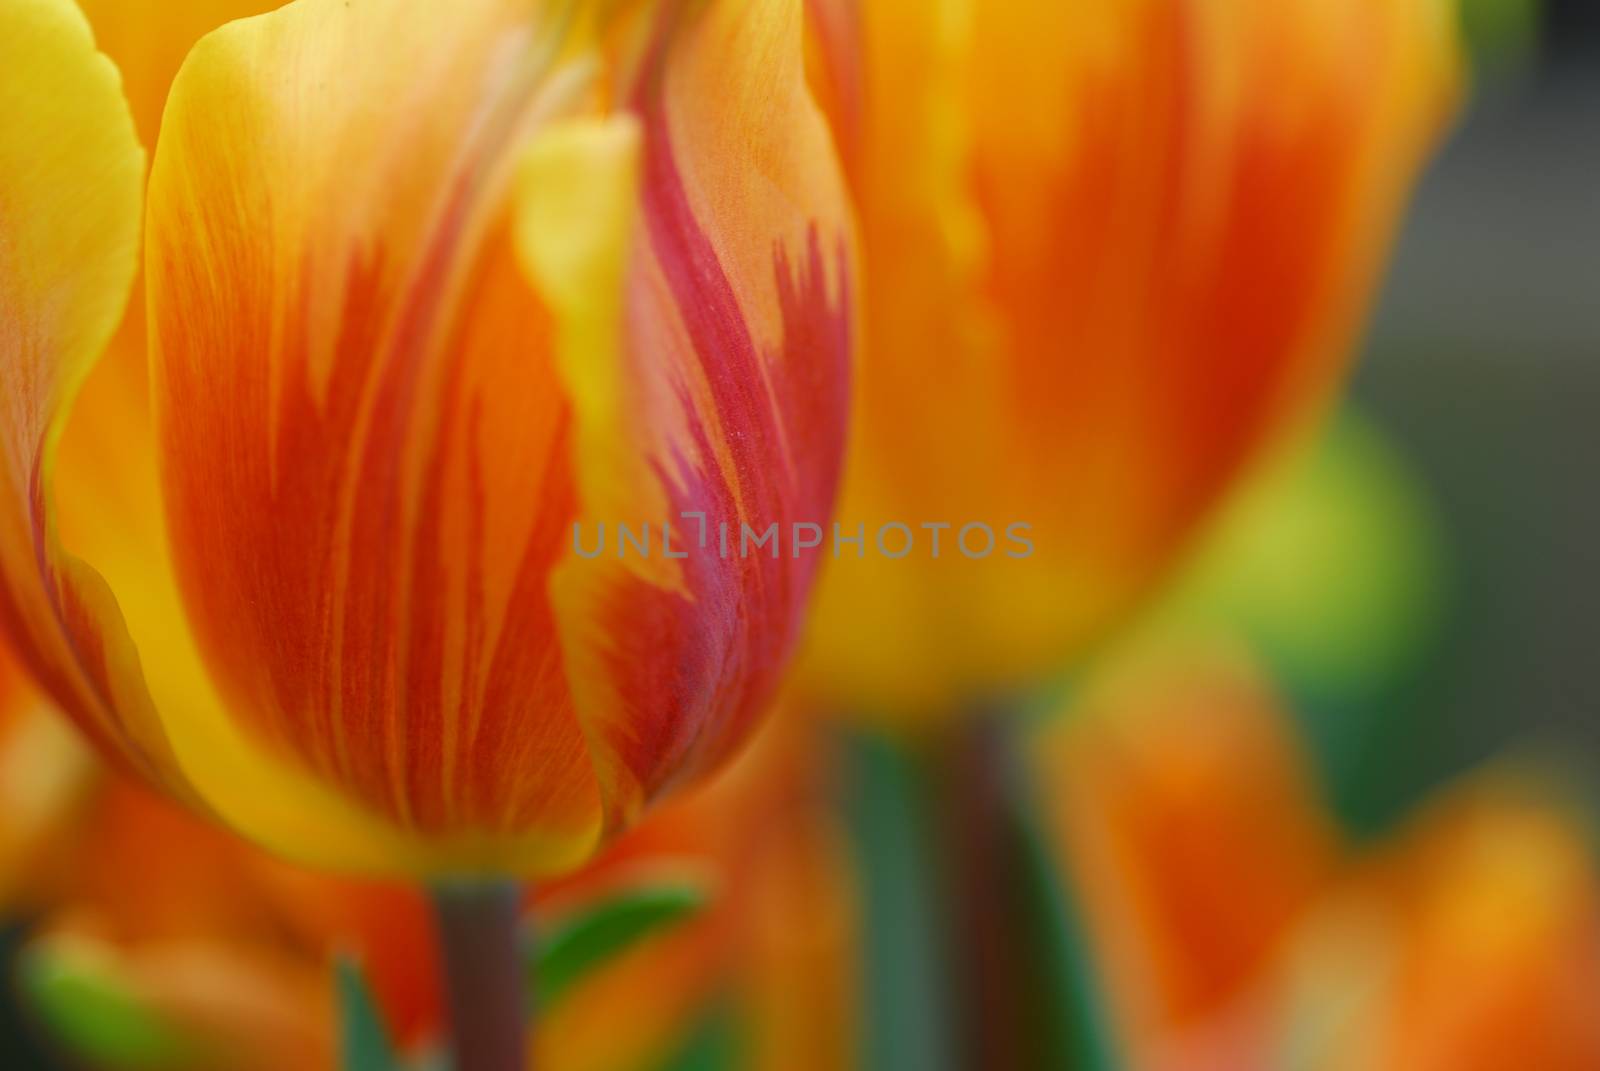 Red Yellow tulip flower in bloom in spring